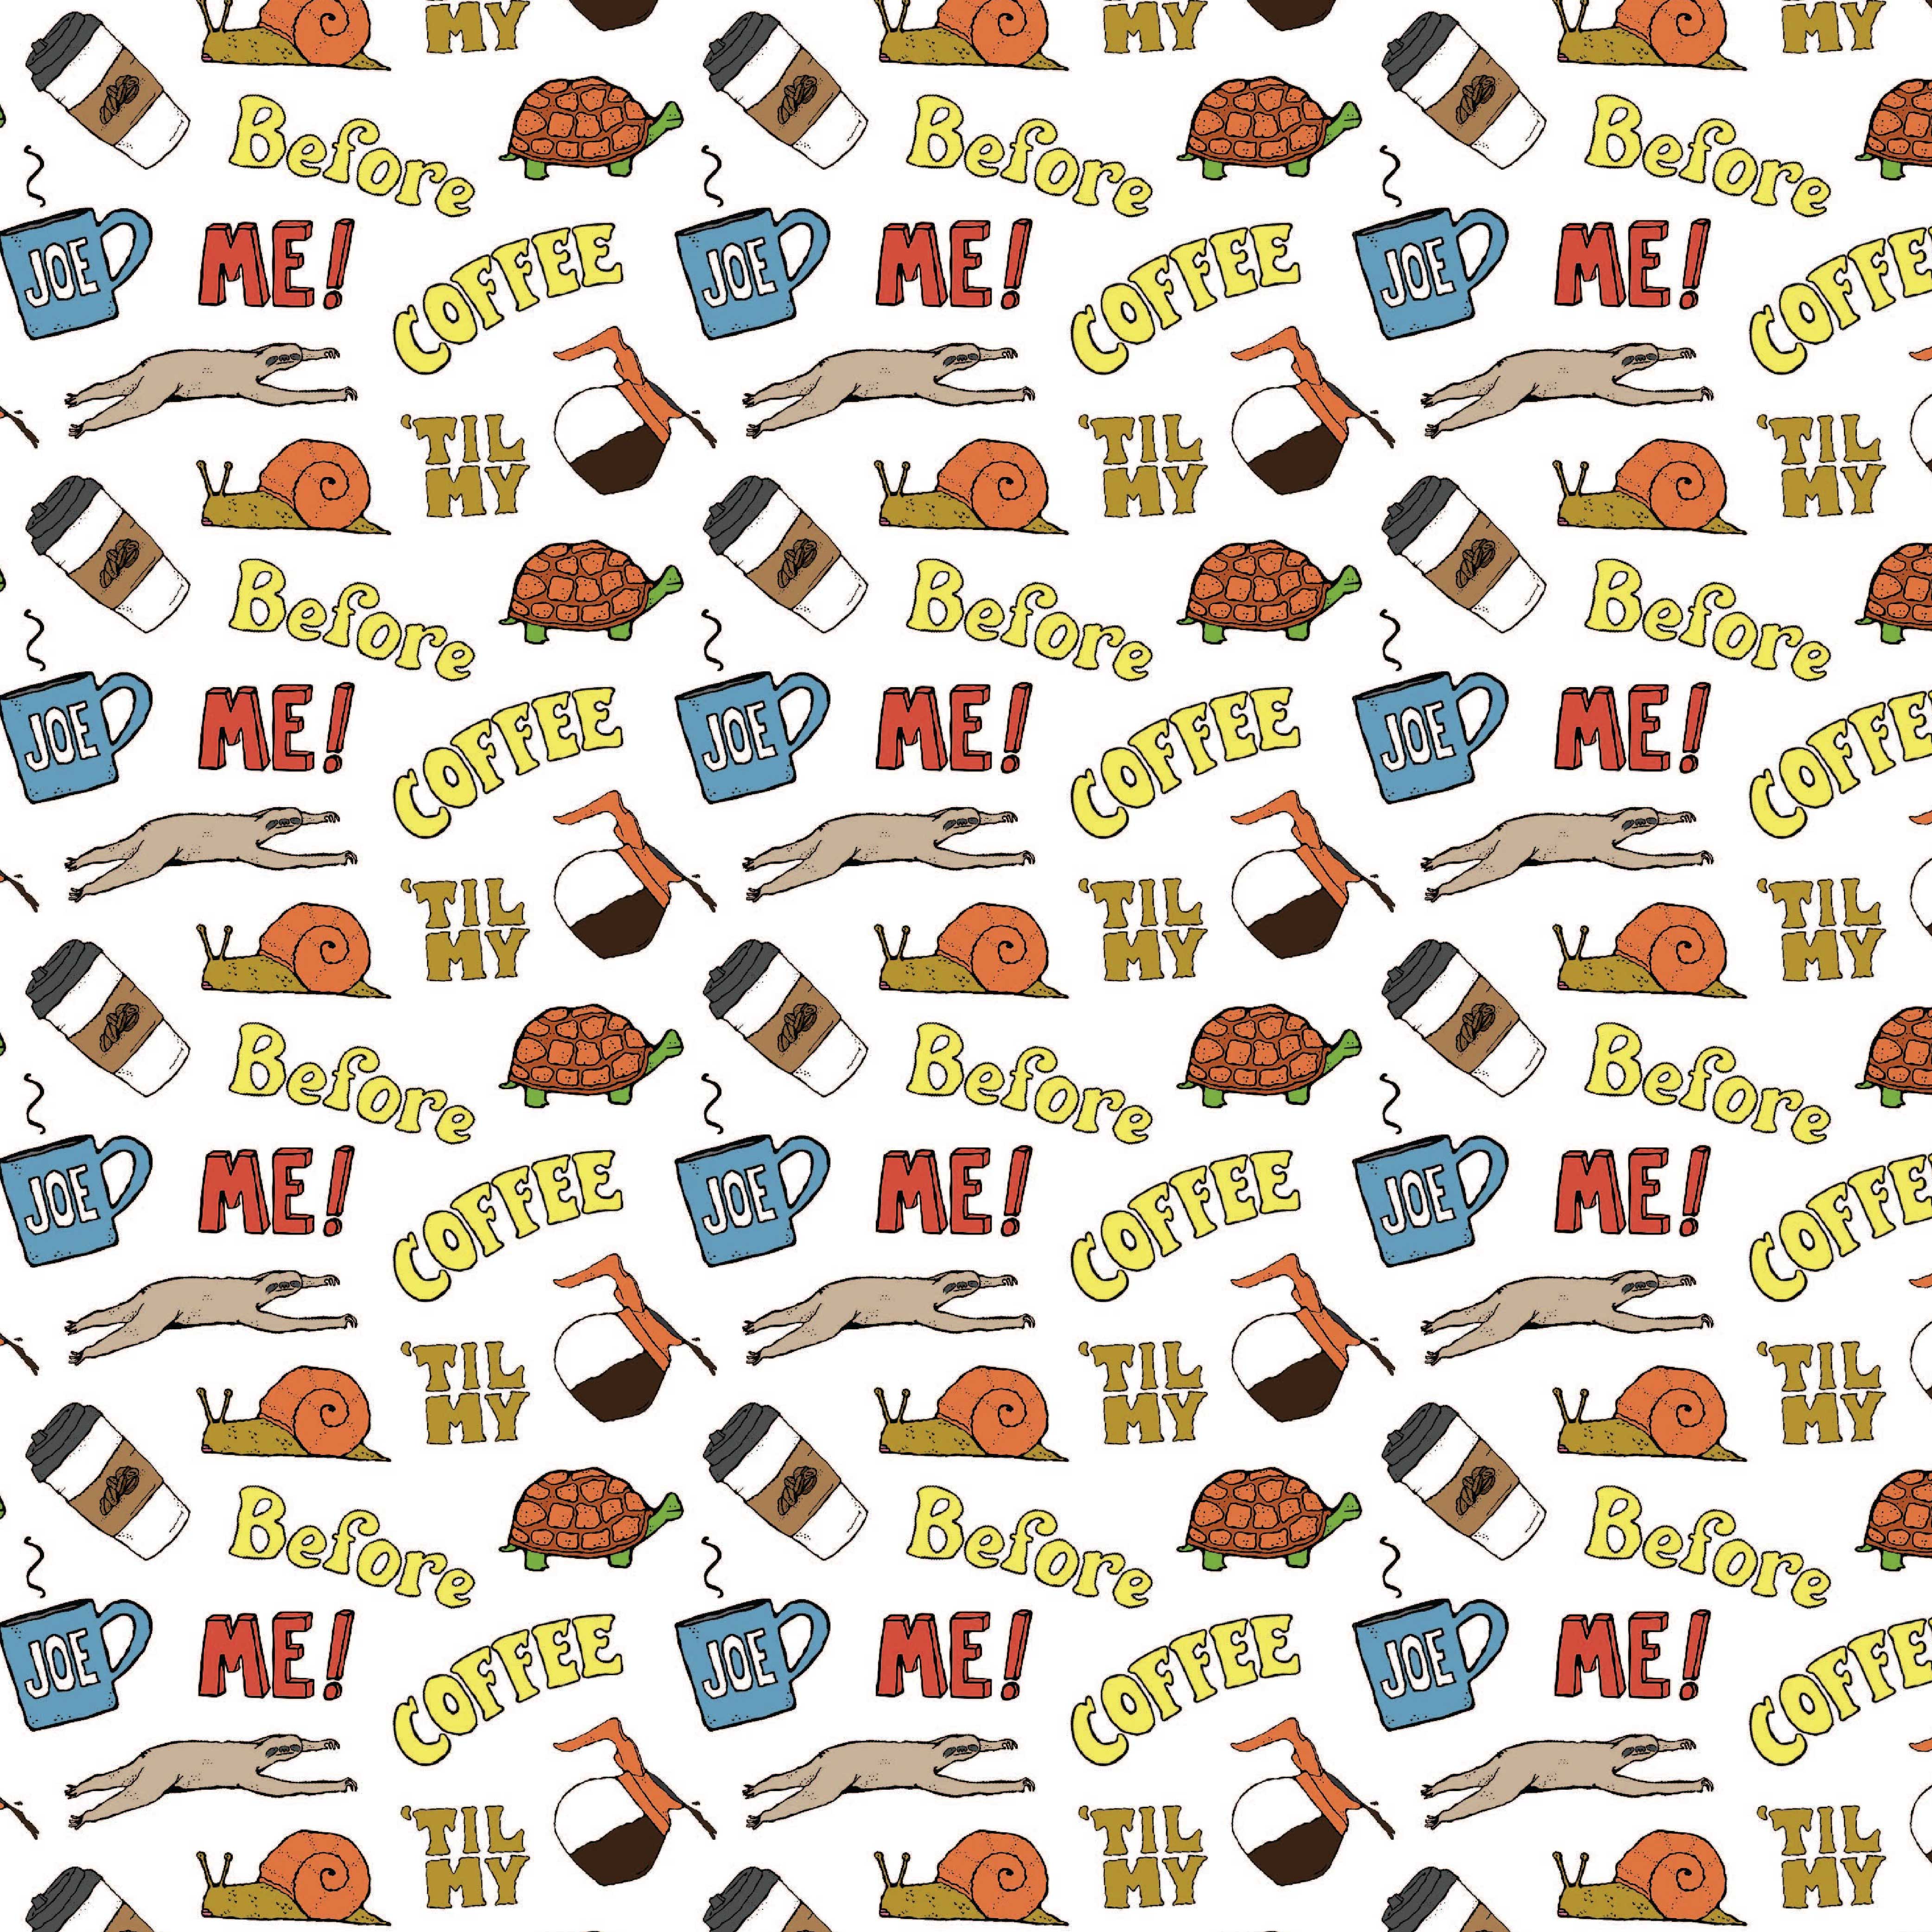 me before coffee seamless pattern featuring cartoon sloth, turtle, snail